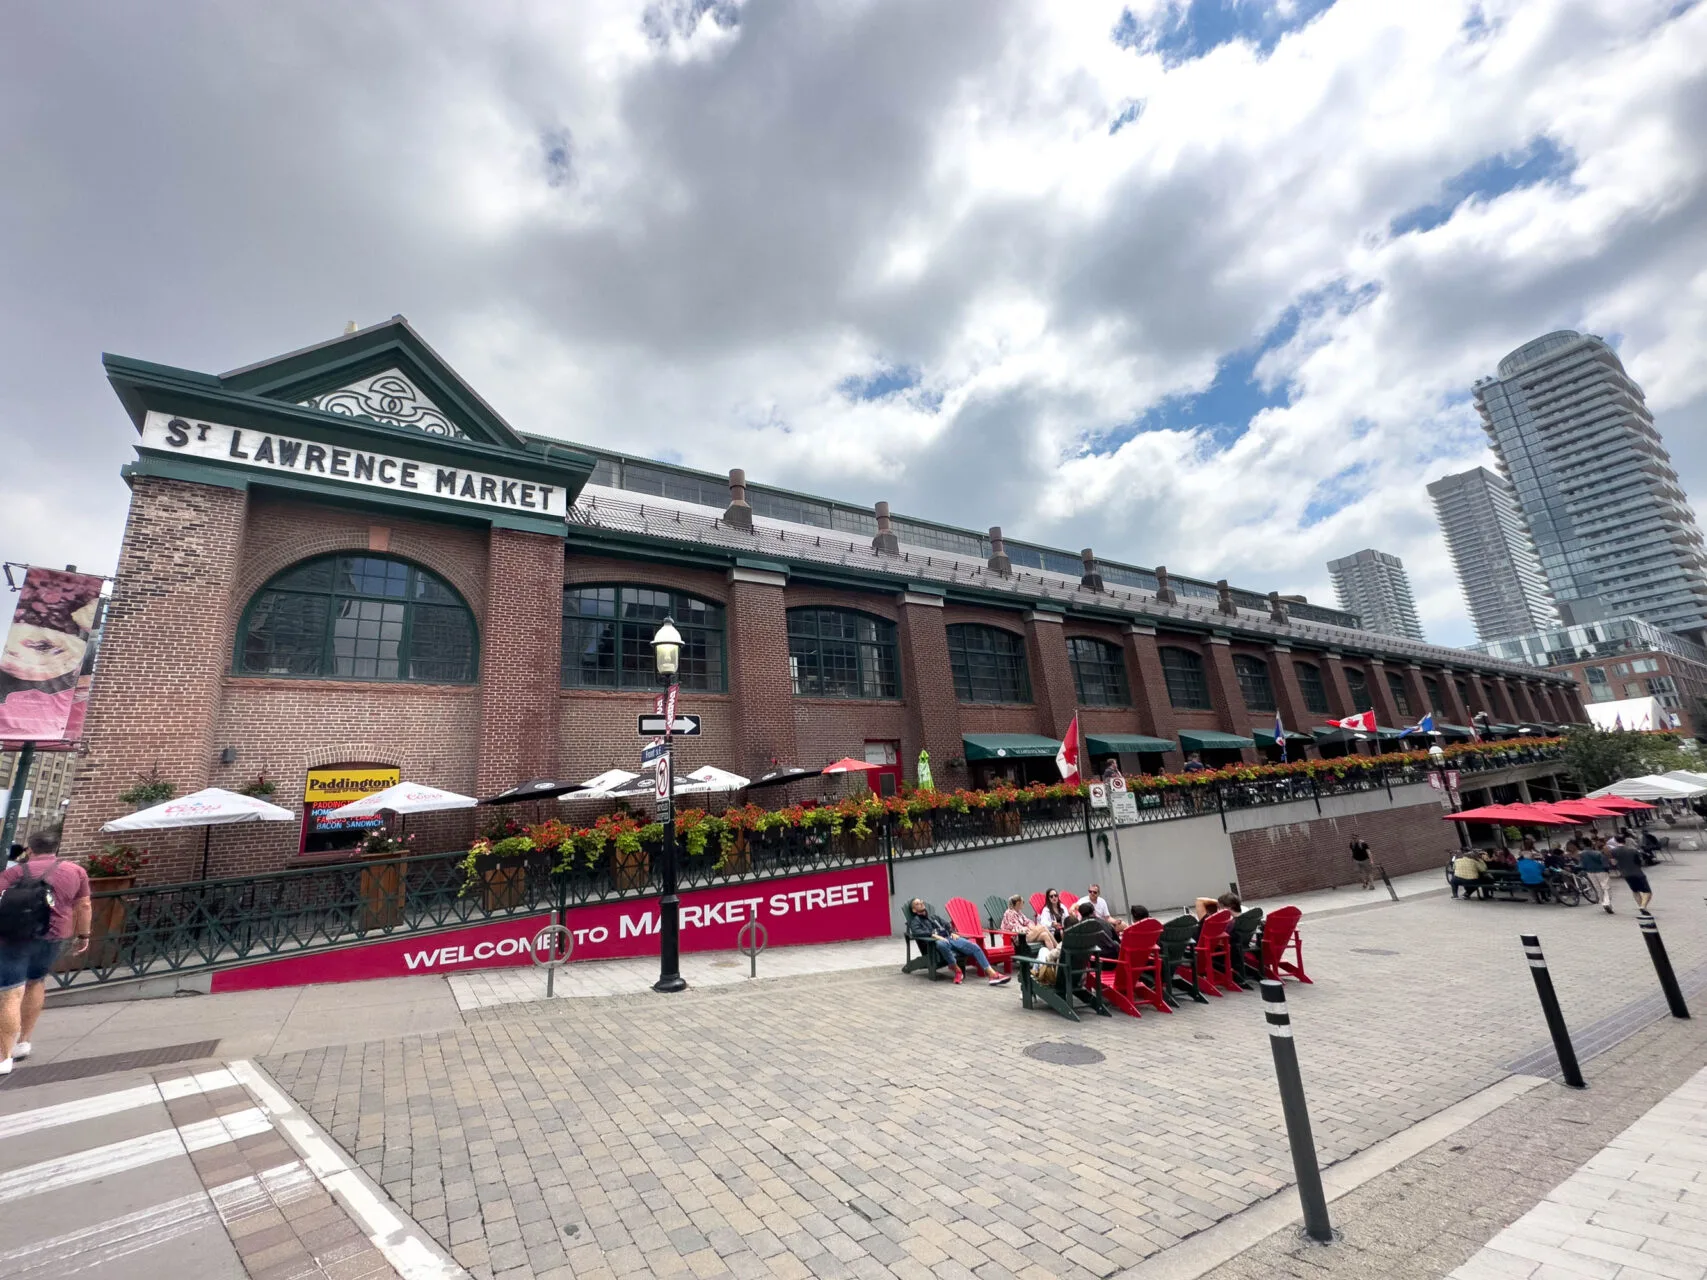 A meander through the famous St. Lawrence Market is one of the main things to do in Toronto.